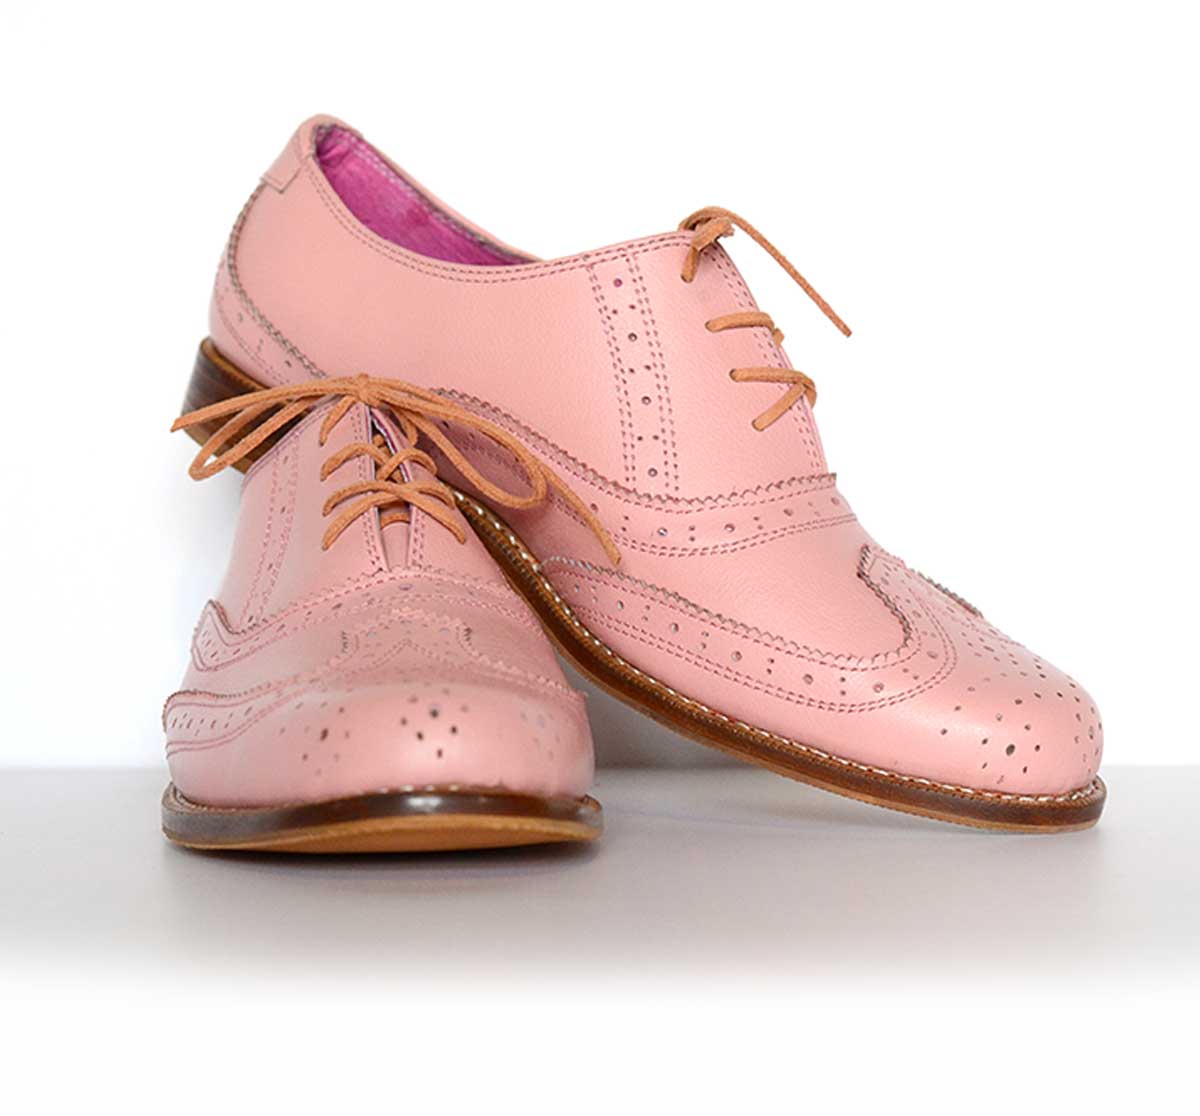 Leather pink oxford shoes handmade by Cristha Fuentes shoemaker artisan